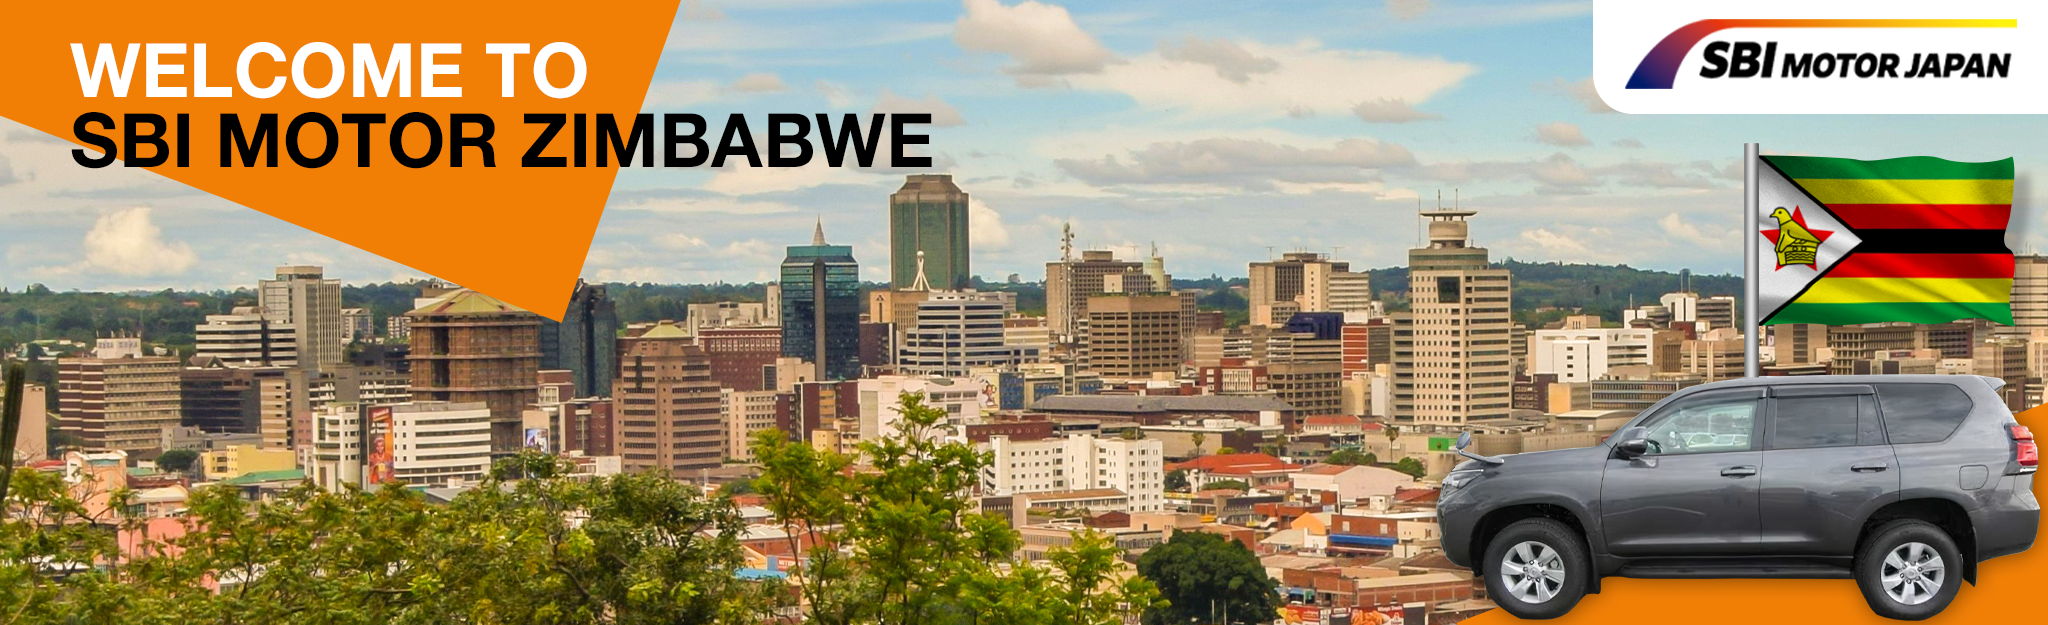 Welcome to SBI Zimbabwe. You can get local support in Zimbabwe! We offer sophisticated Japanese used cars.